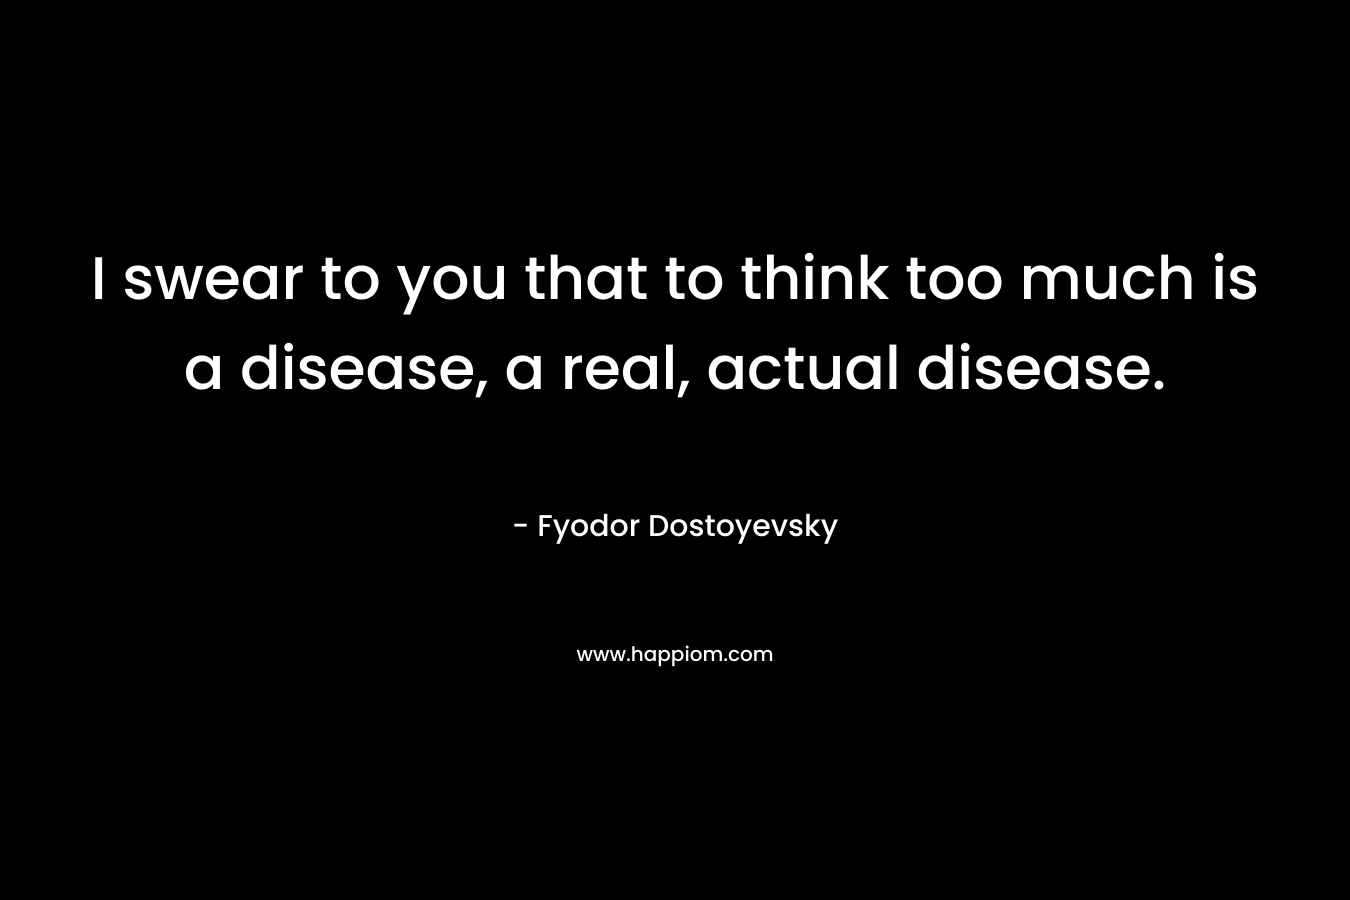 I swear to you that to think too much is a disease, a real, actual disease.